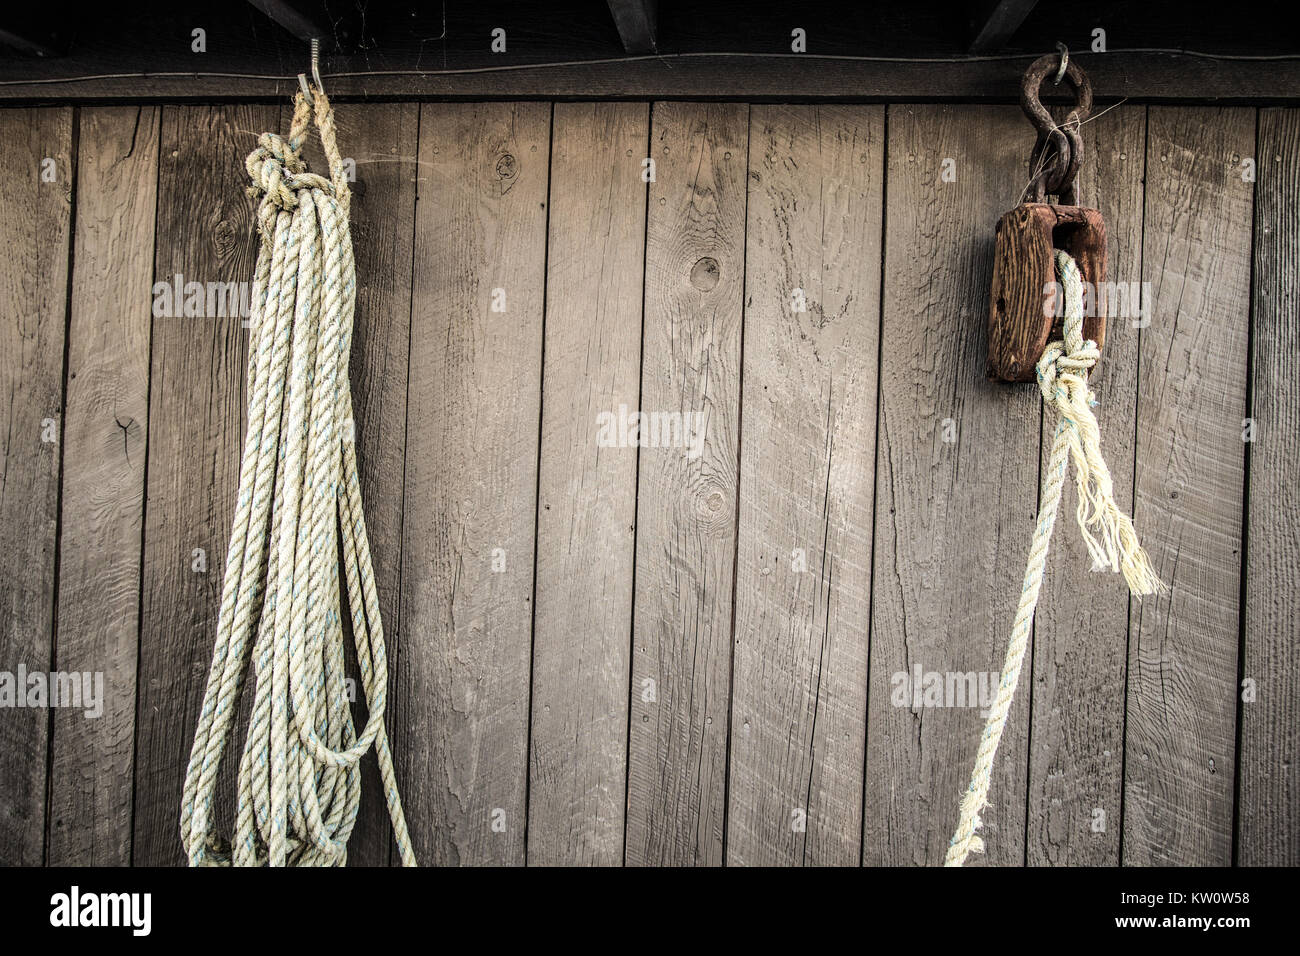 Block And Tackle Pulley. Fisherman's block and tackle pulley system with white rope set against a weathered wooden background. Stock Photo